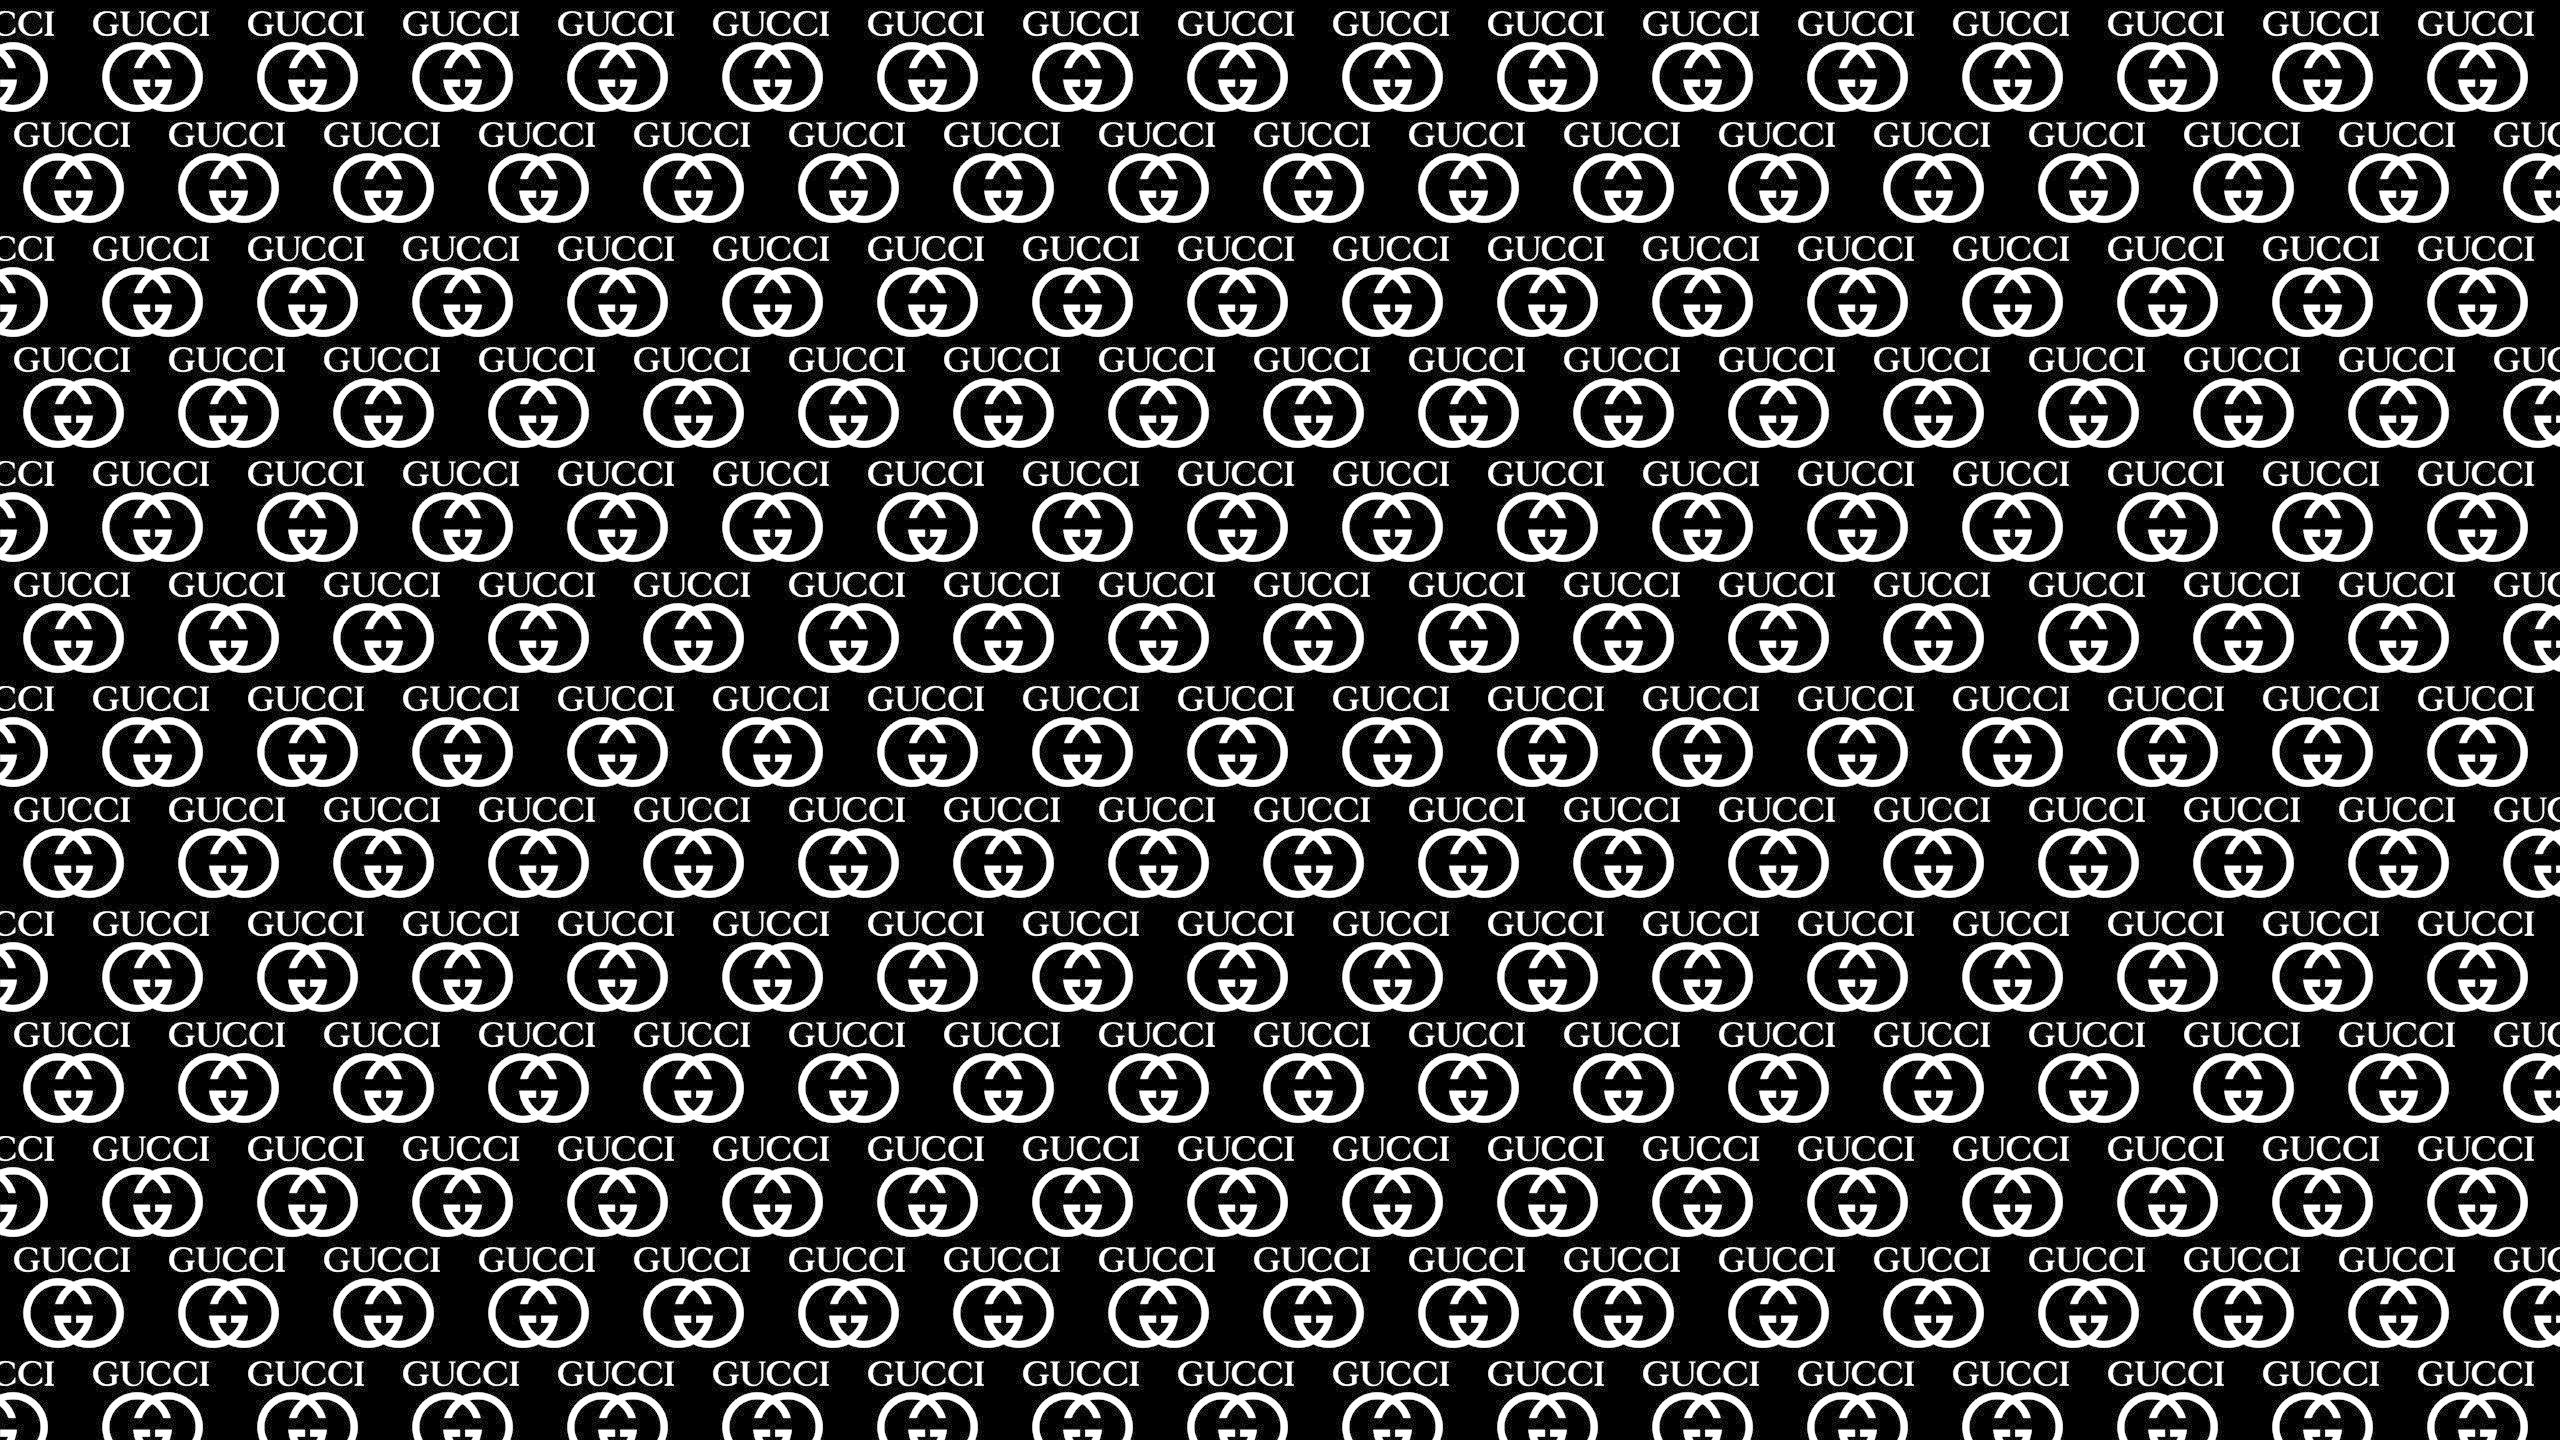 Gucci: Monochrome, Pattern, An Italian fashion label founded in 1921. 2560x1440 HD Background.